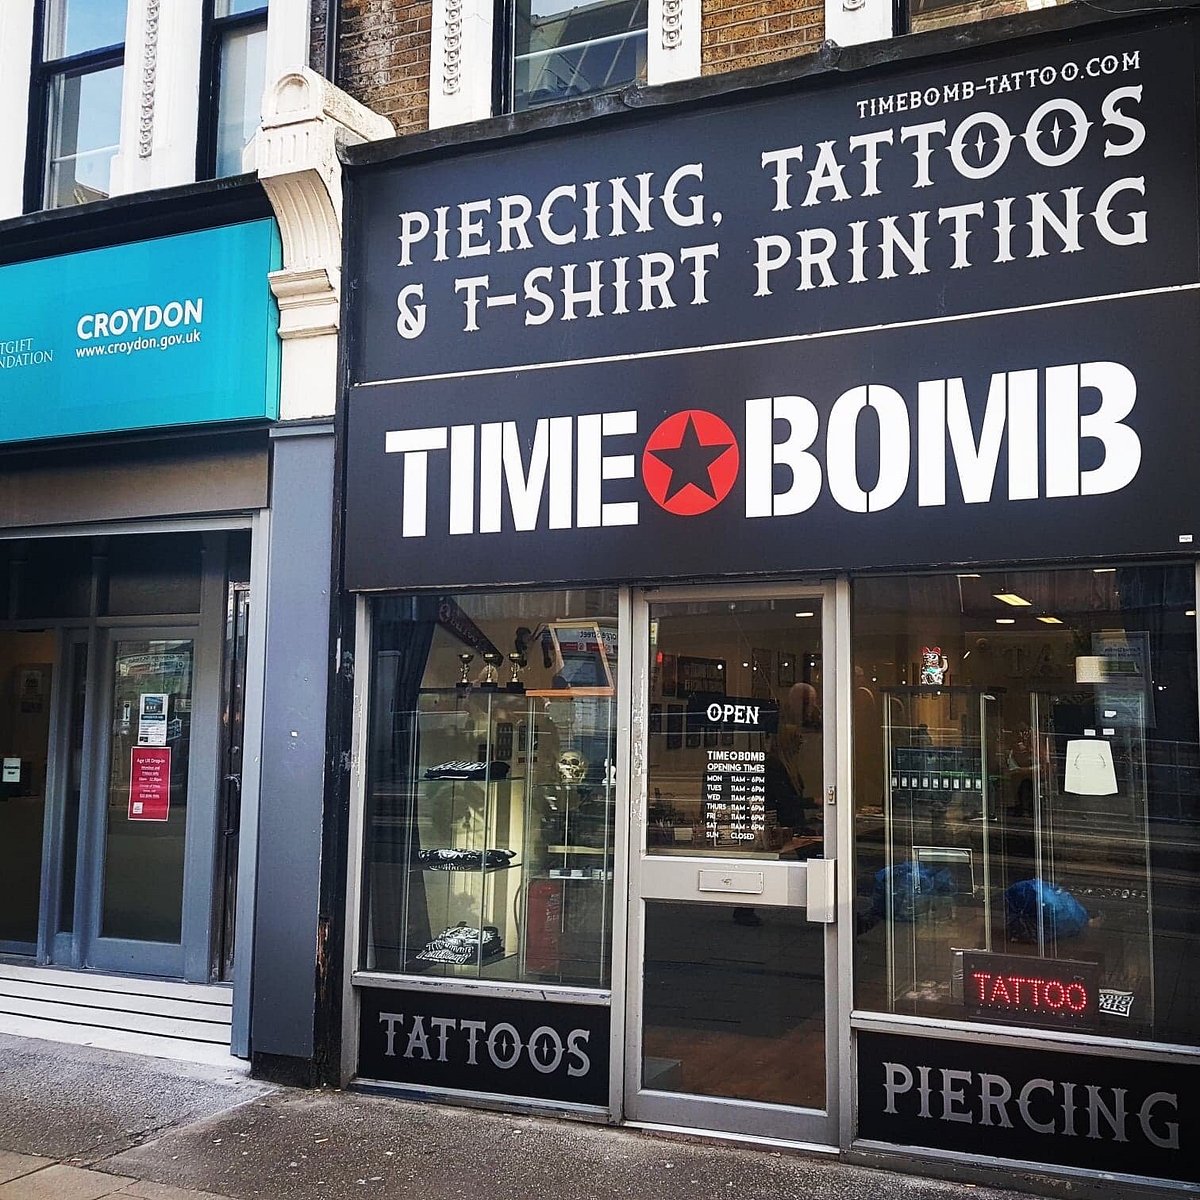 Timebomb Tattoo And Piercing 크로이던 Timebomb Tattoo And Piercing의 리뷰